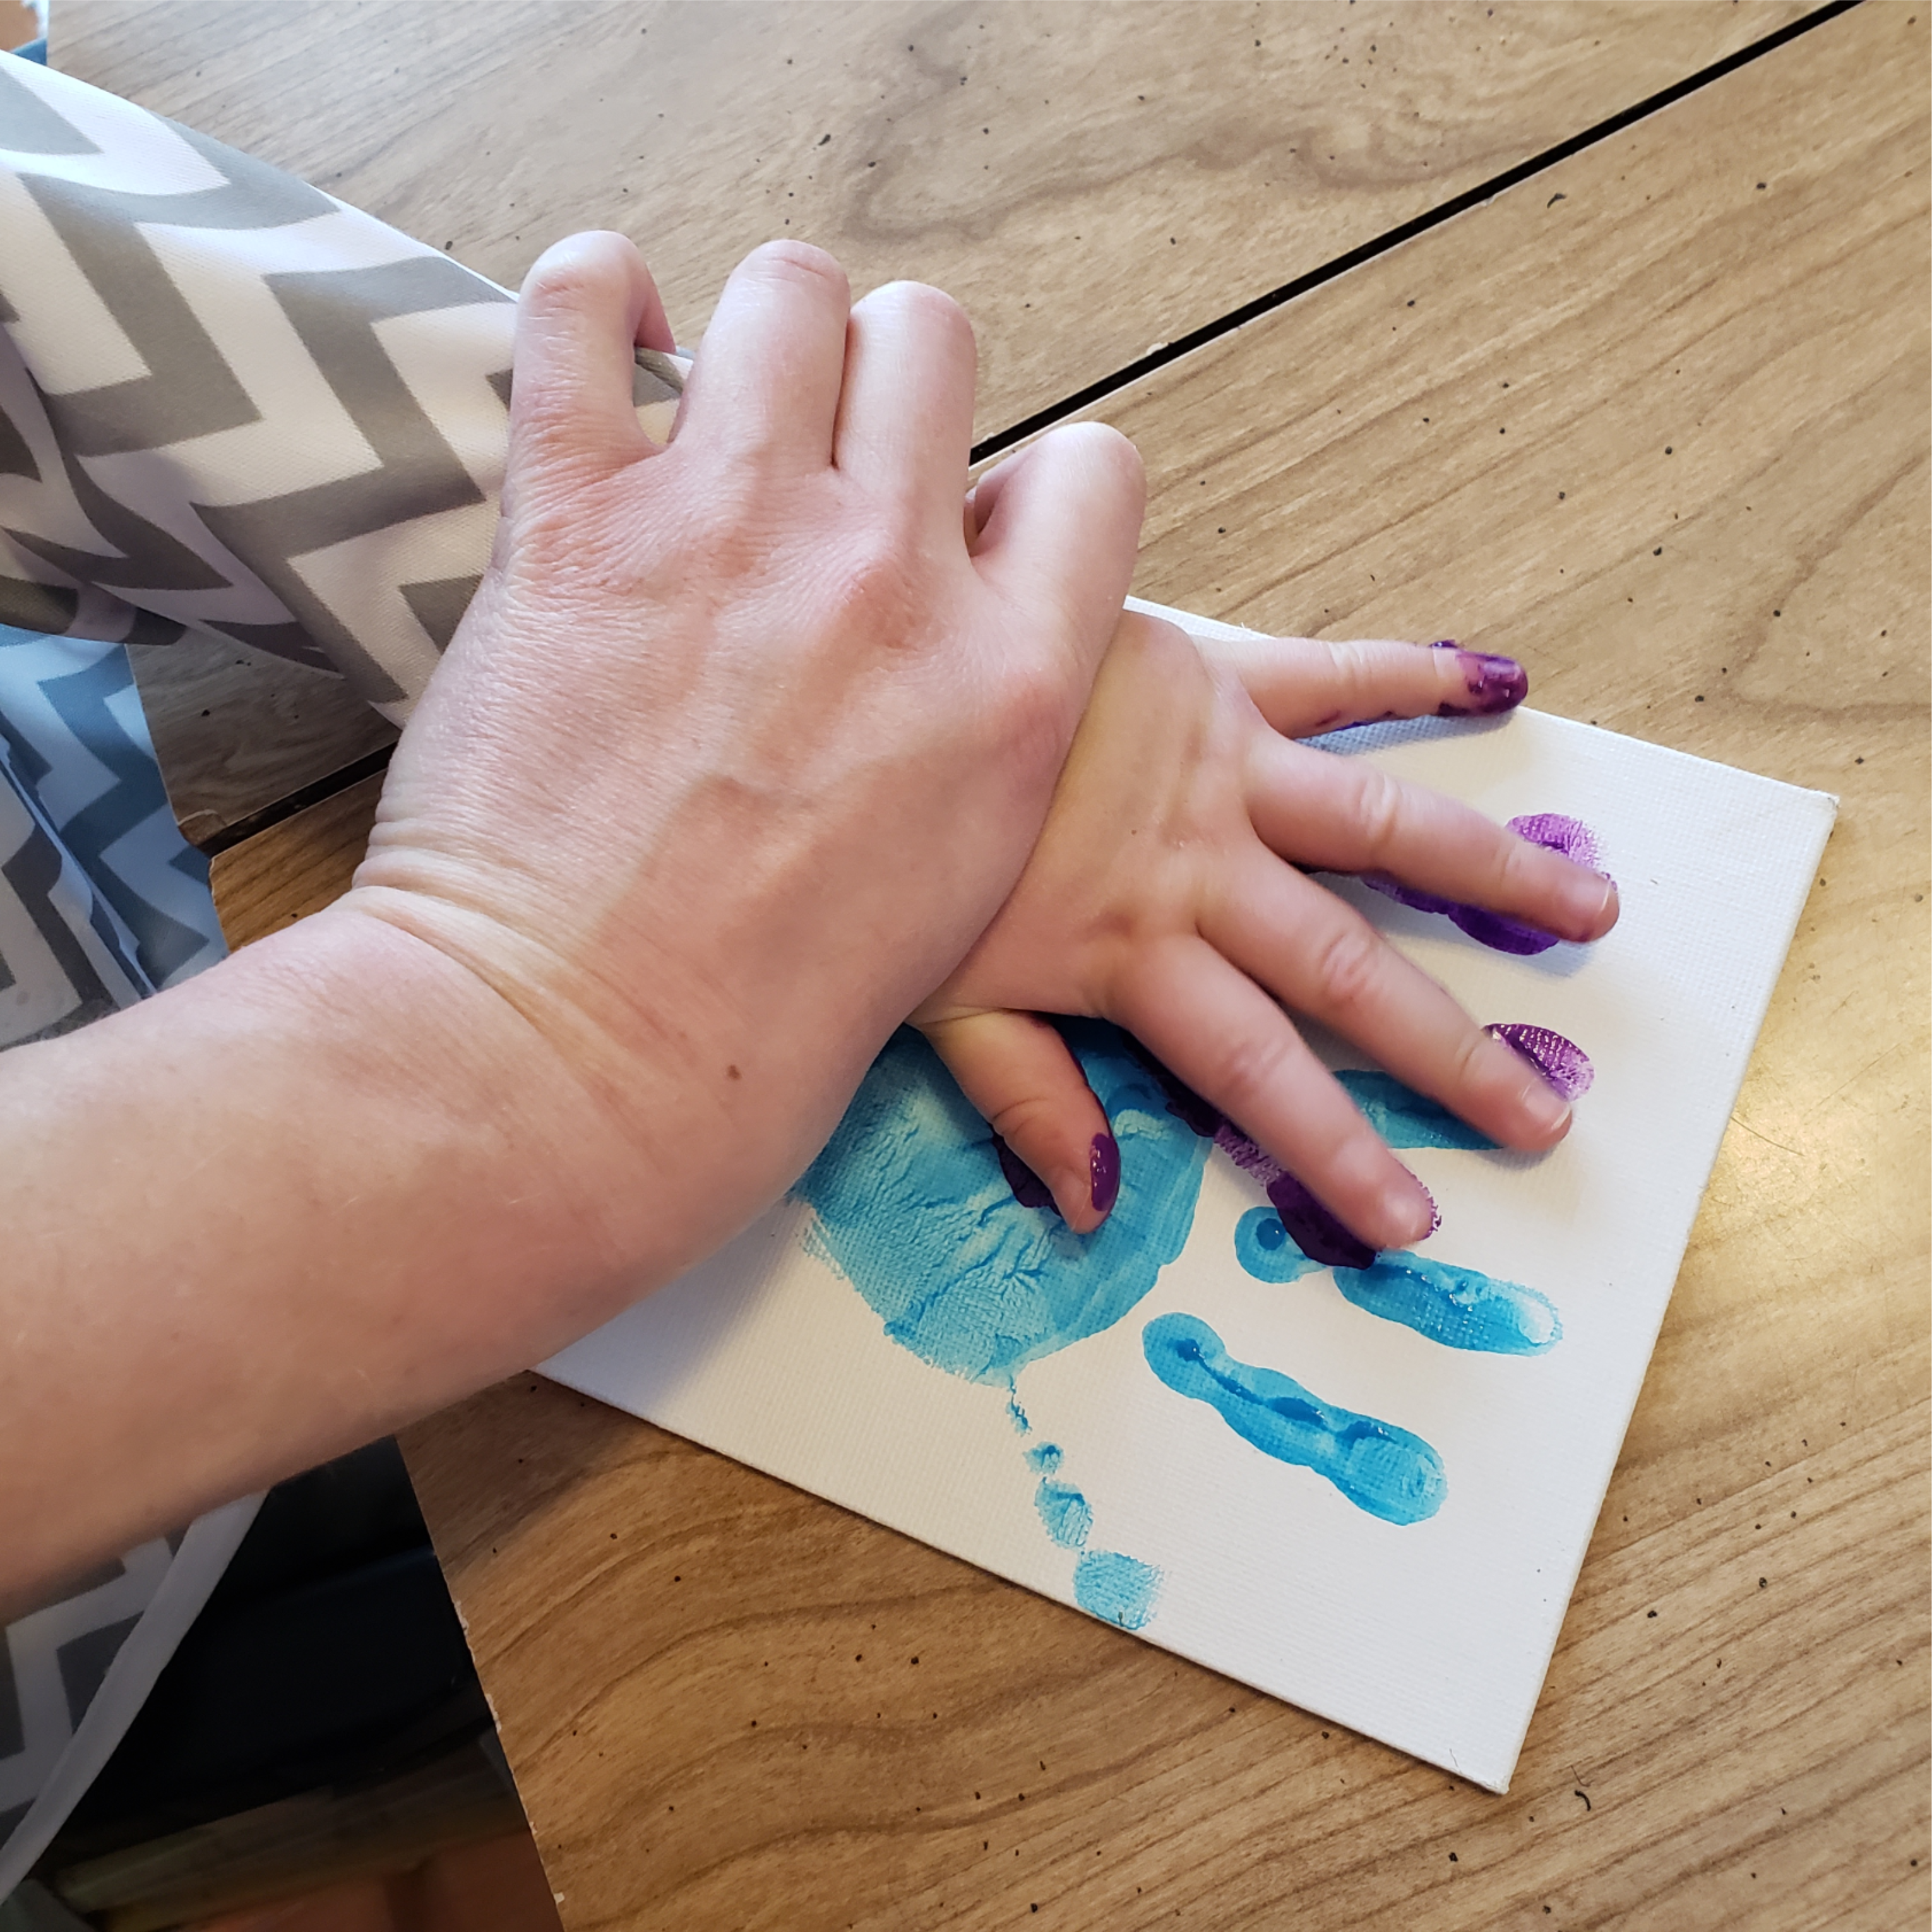 Creation of handprint flowers for craft